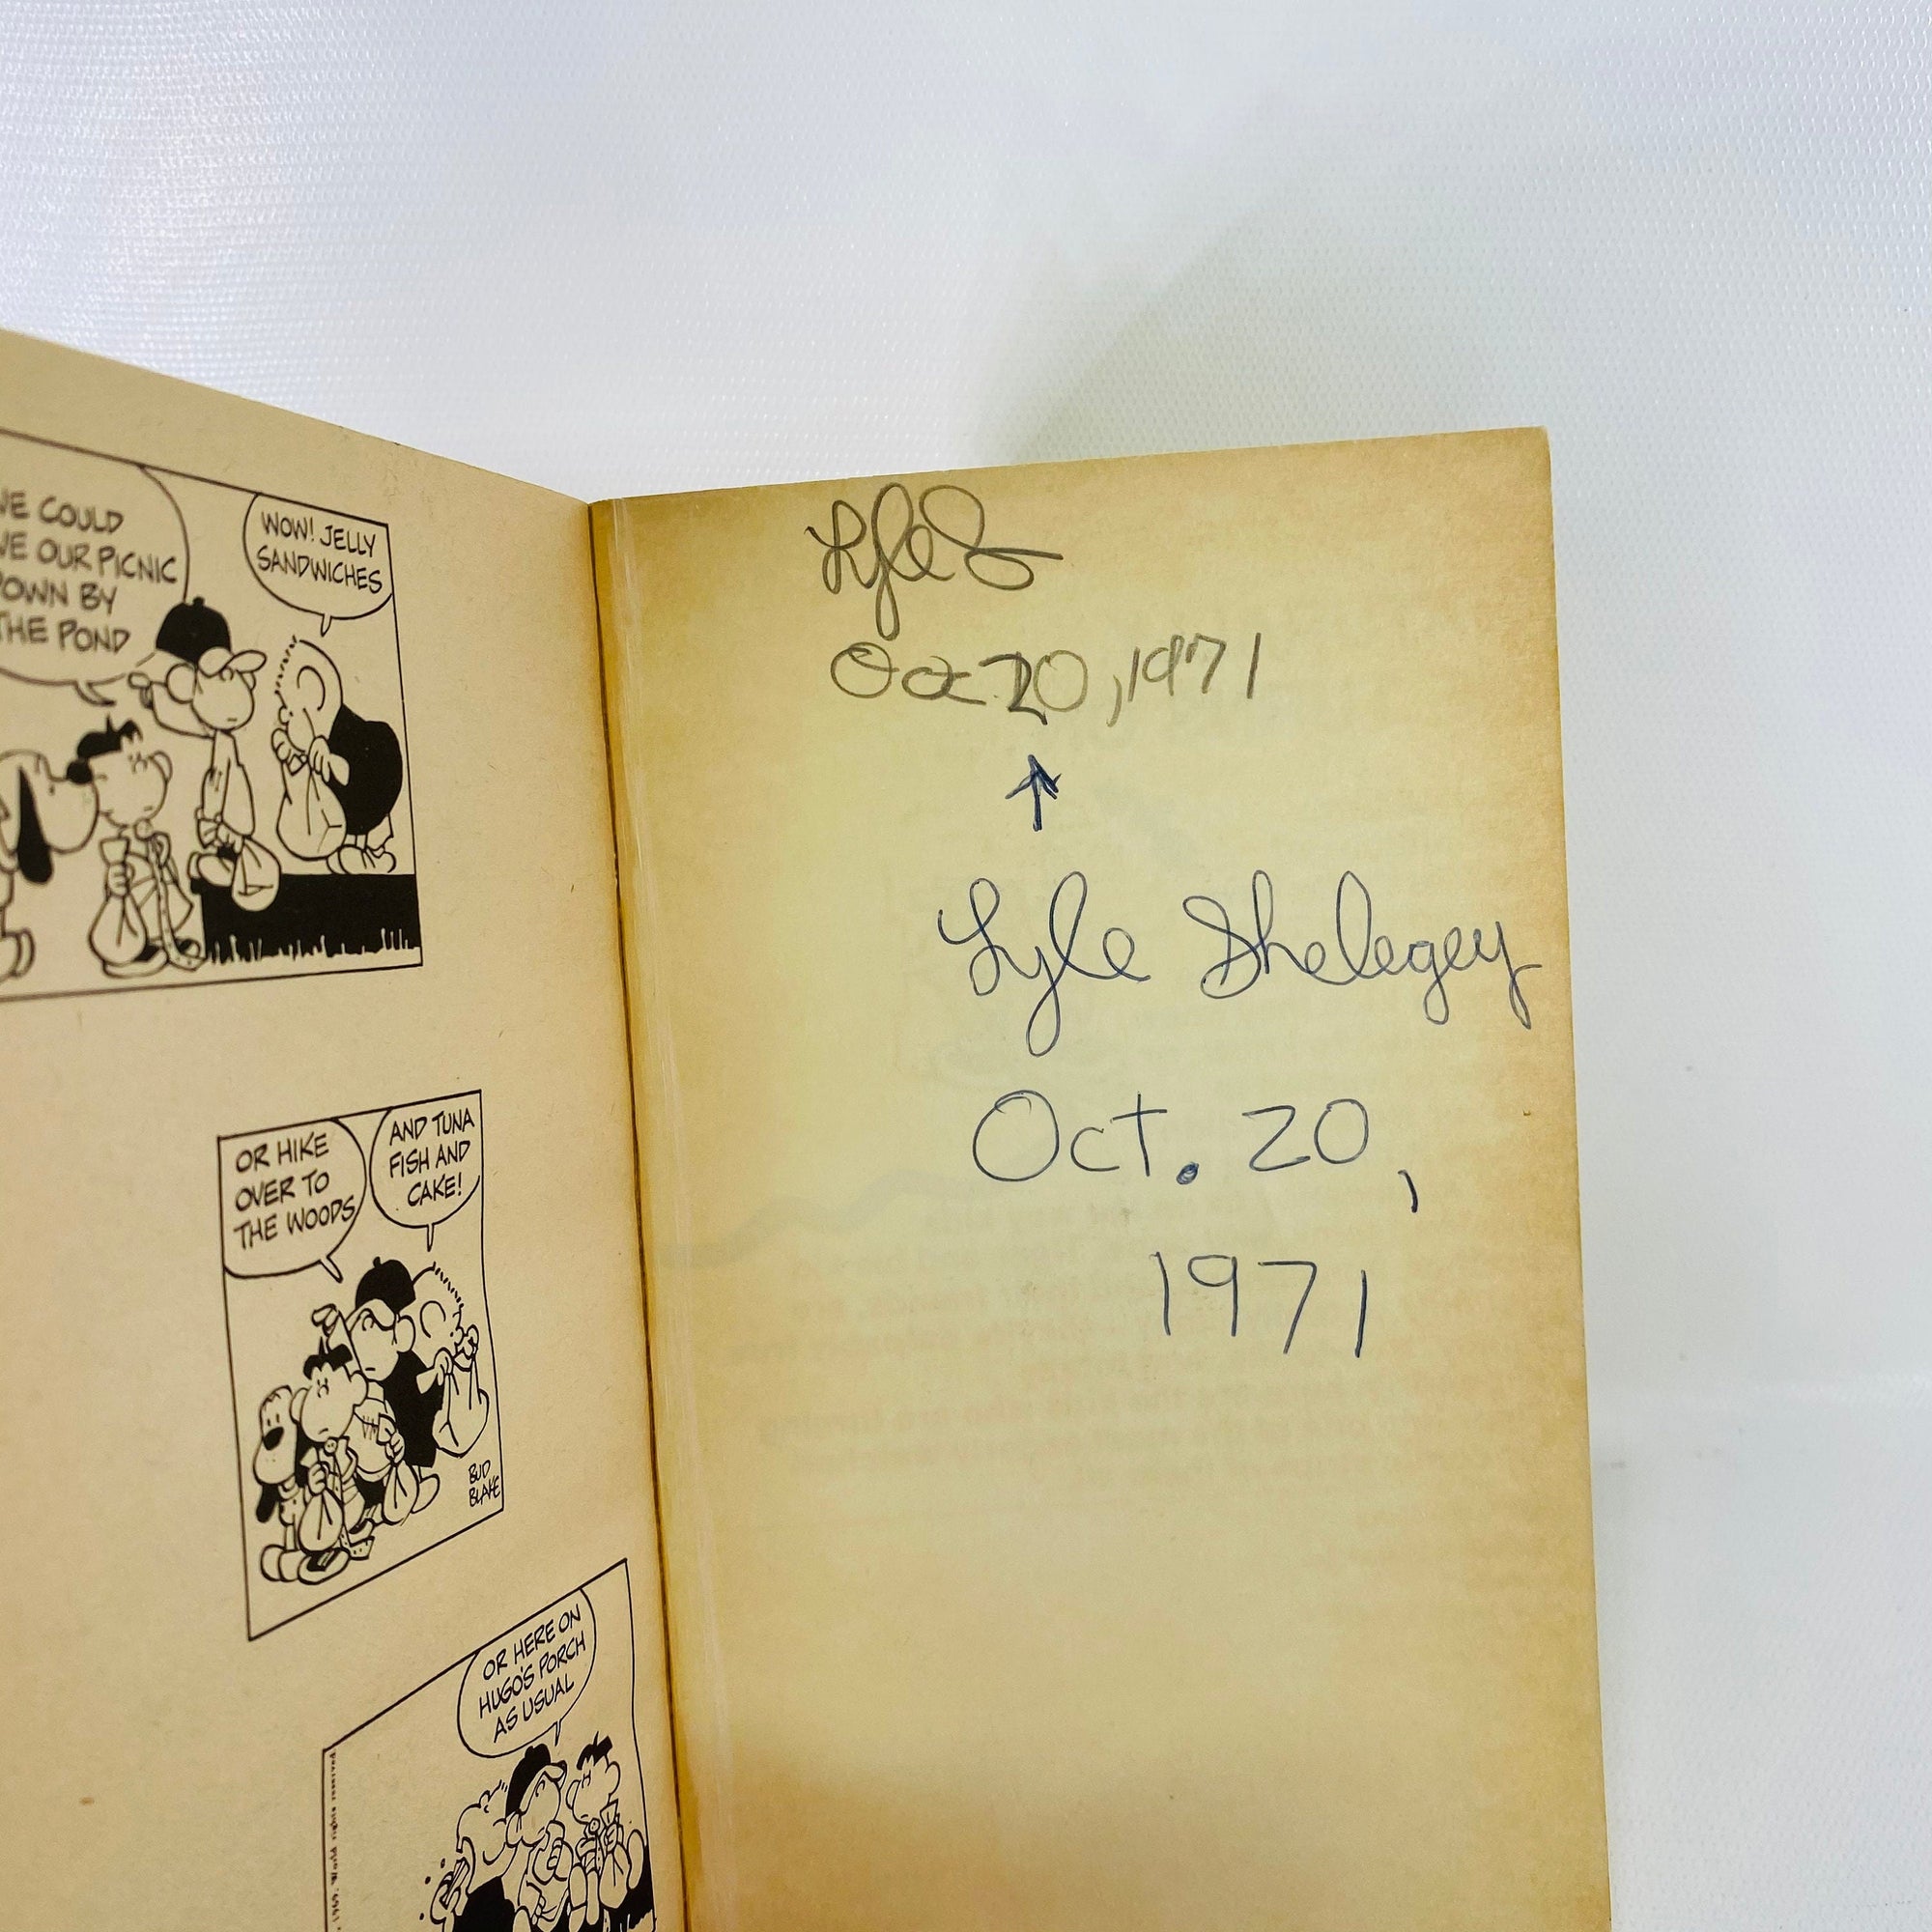 6 Cartoon Books featuring the Peanut's Gang by Charles M. Schulz Starring Charlie Brown SnoopyVintage Book